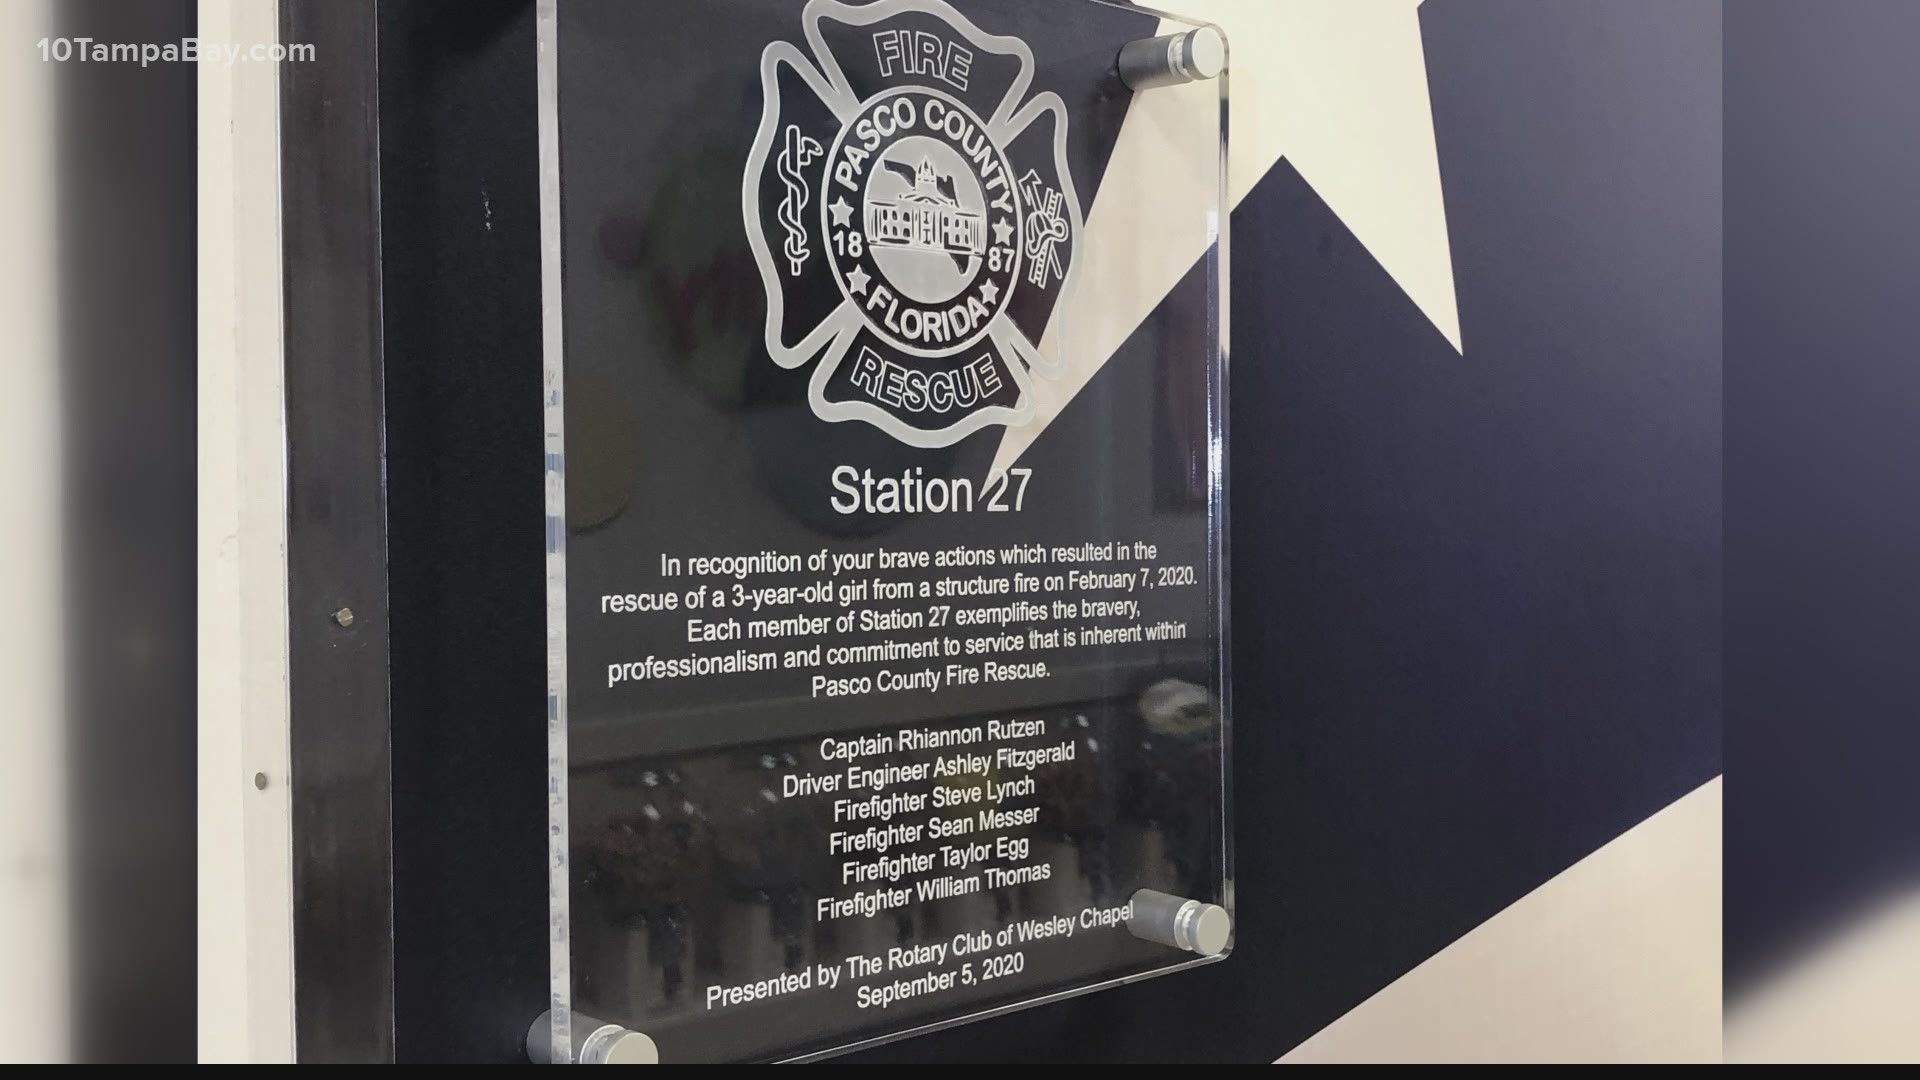 The Rotary Club of Wesley Chapel presented a Sept. 11 memorial plaque to Pasco County first responders.